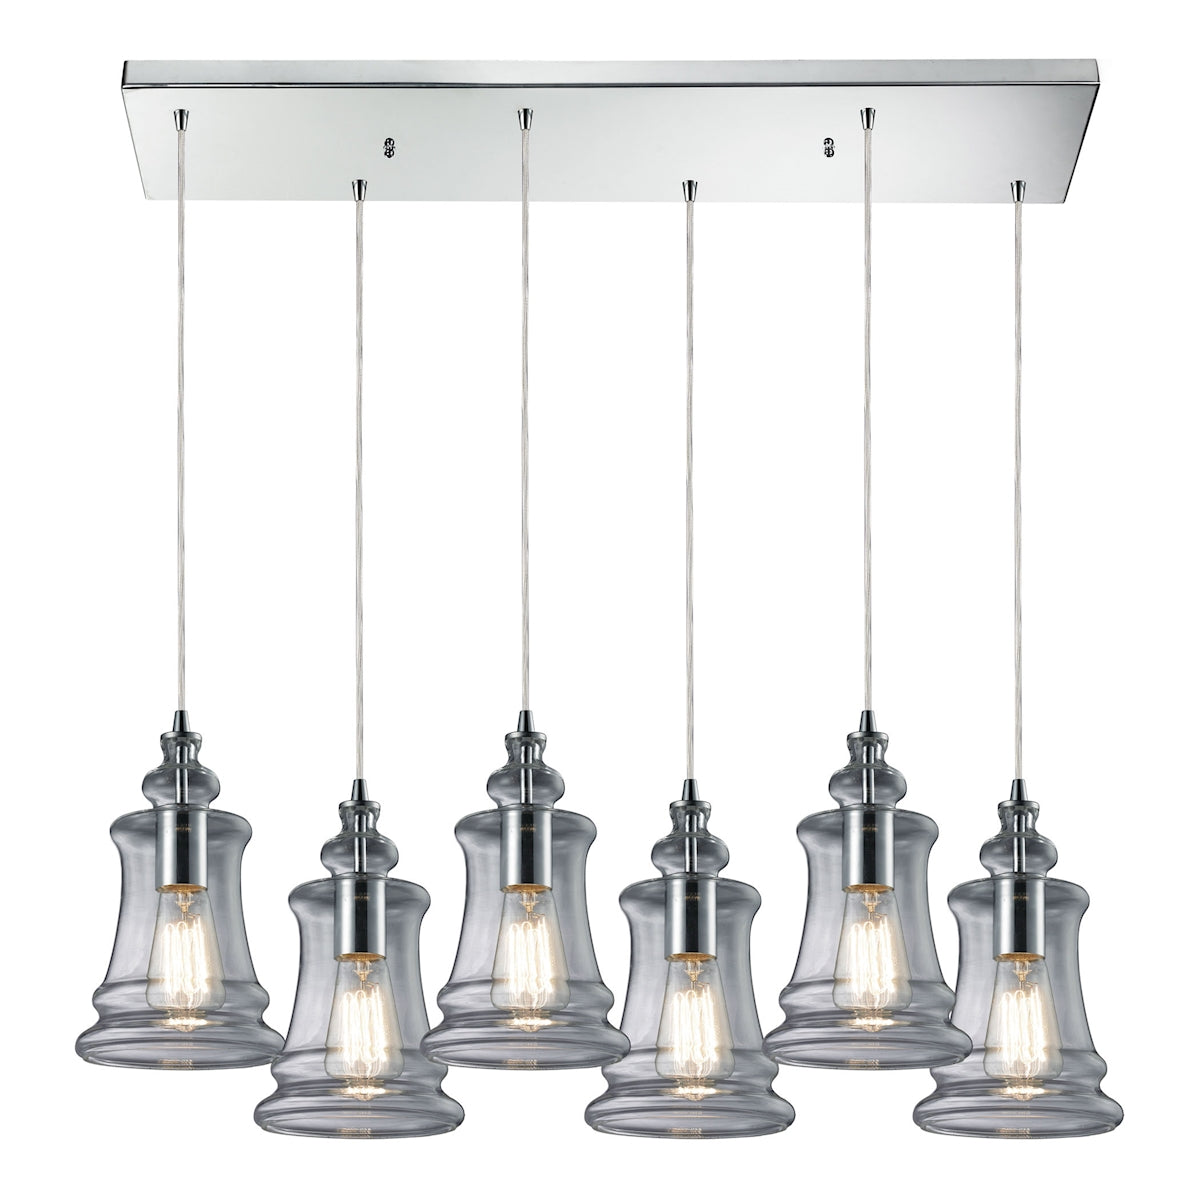 ELK Lighting 60052-6RC Menlow Park 6-Light Rectangular Pendant Fixture in Polished Chrome with Smoked Glass